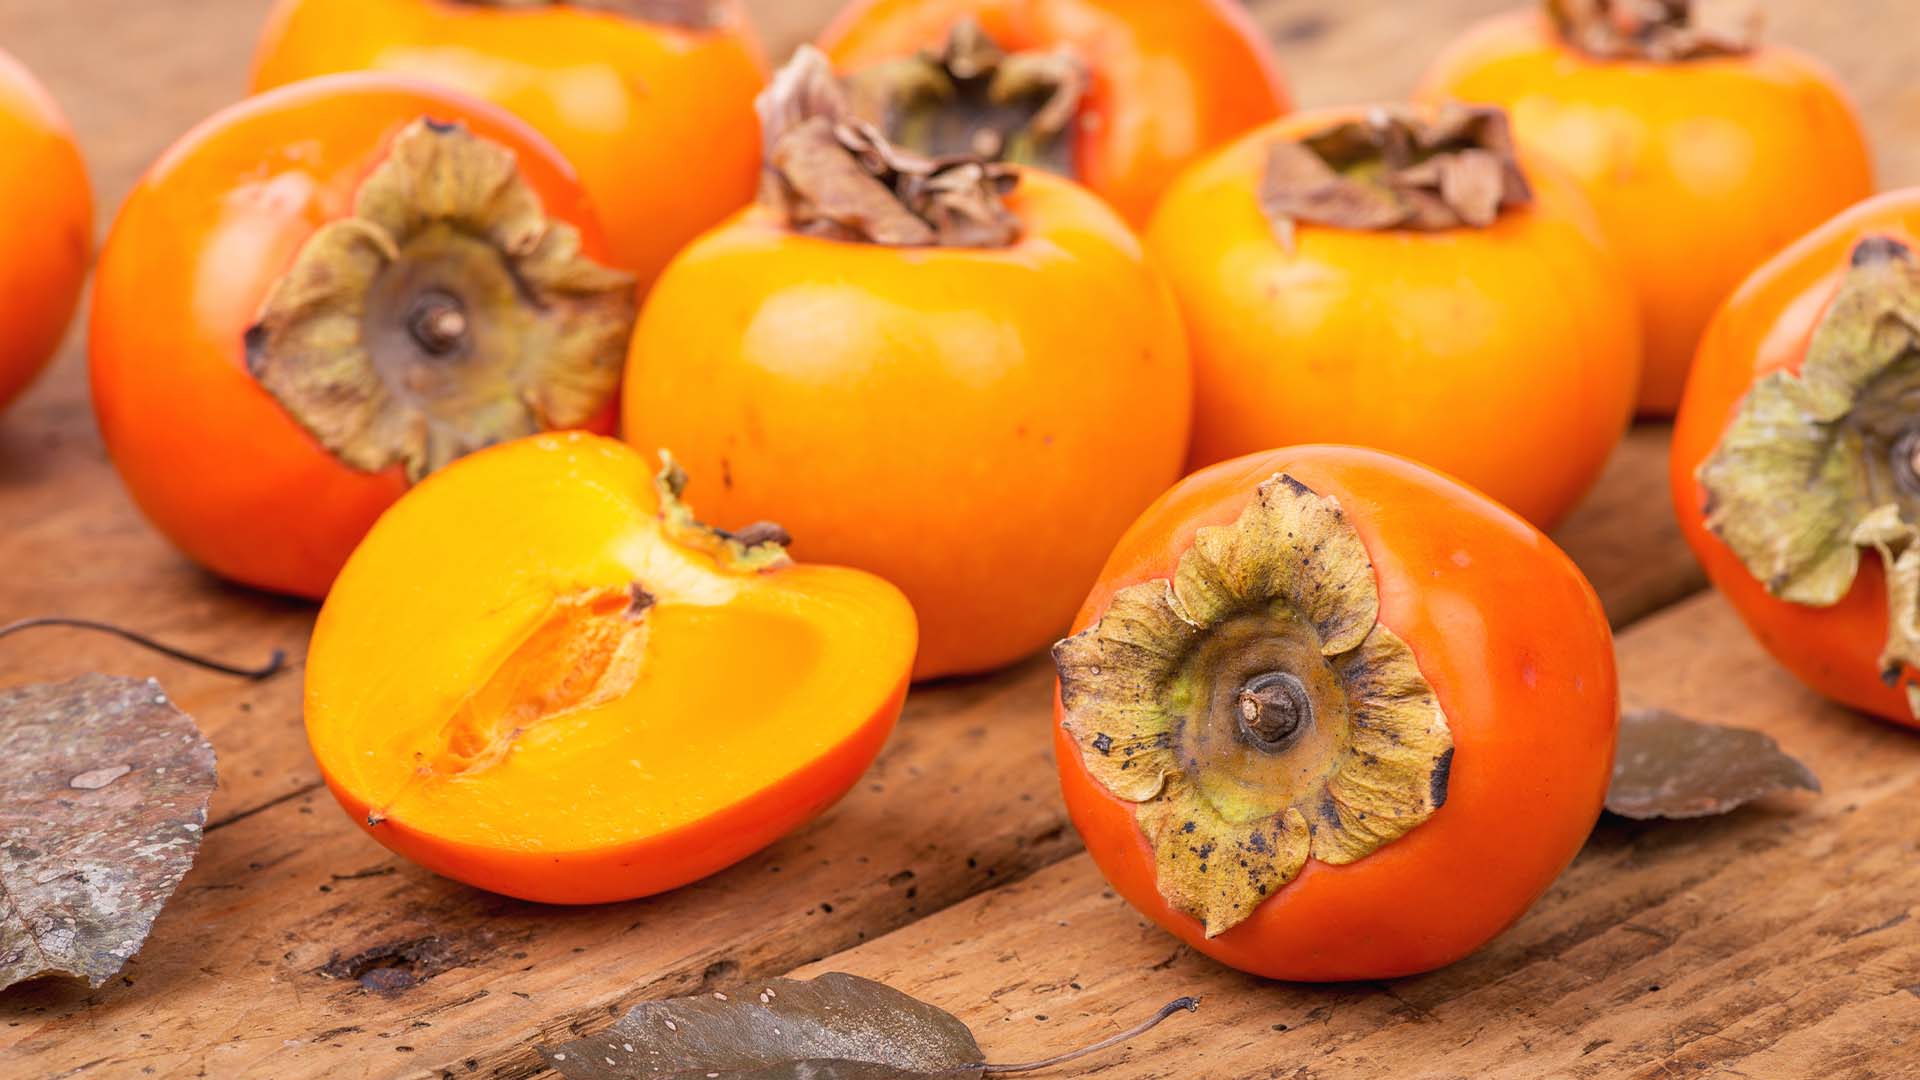 where to buy persimmons